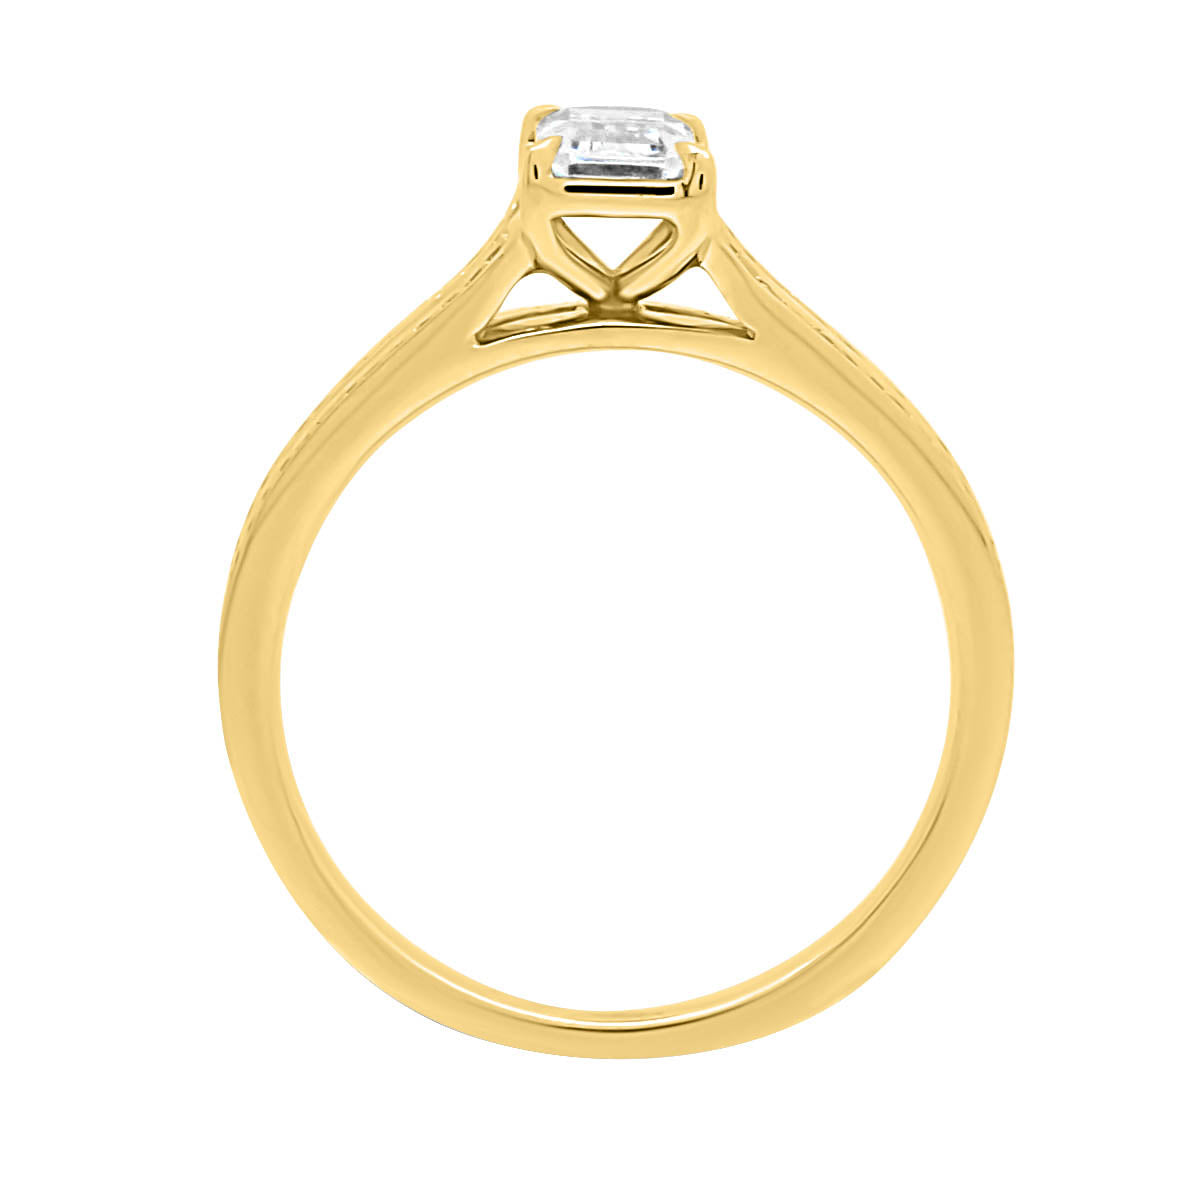 Emerald Cut With Split Shoulders in yellow gold in an upright standing position